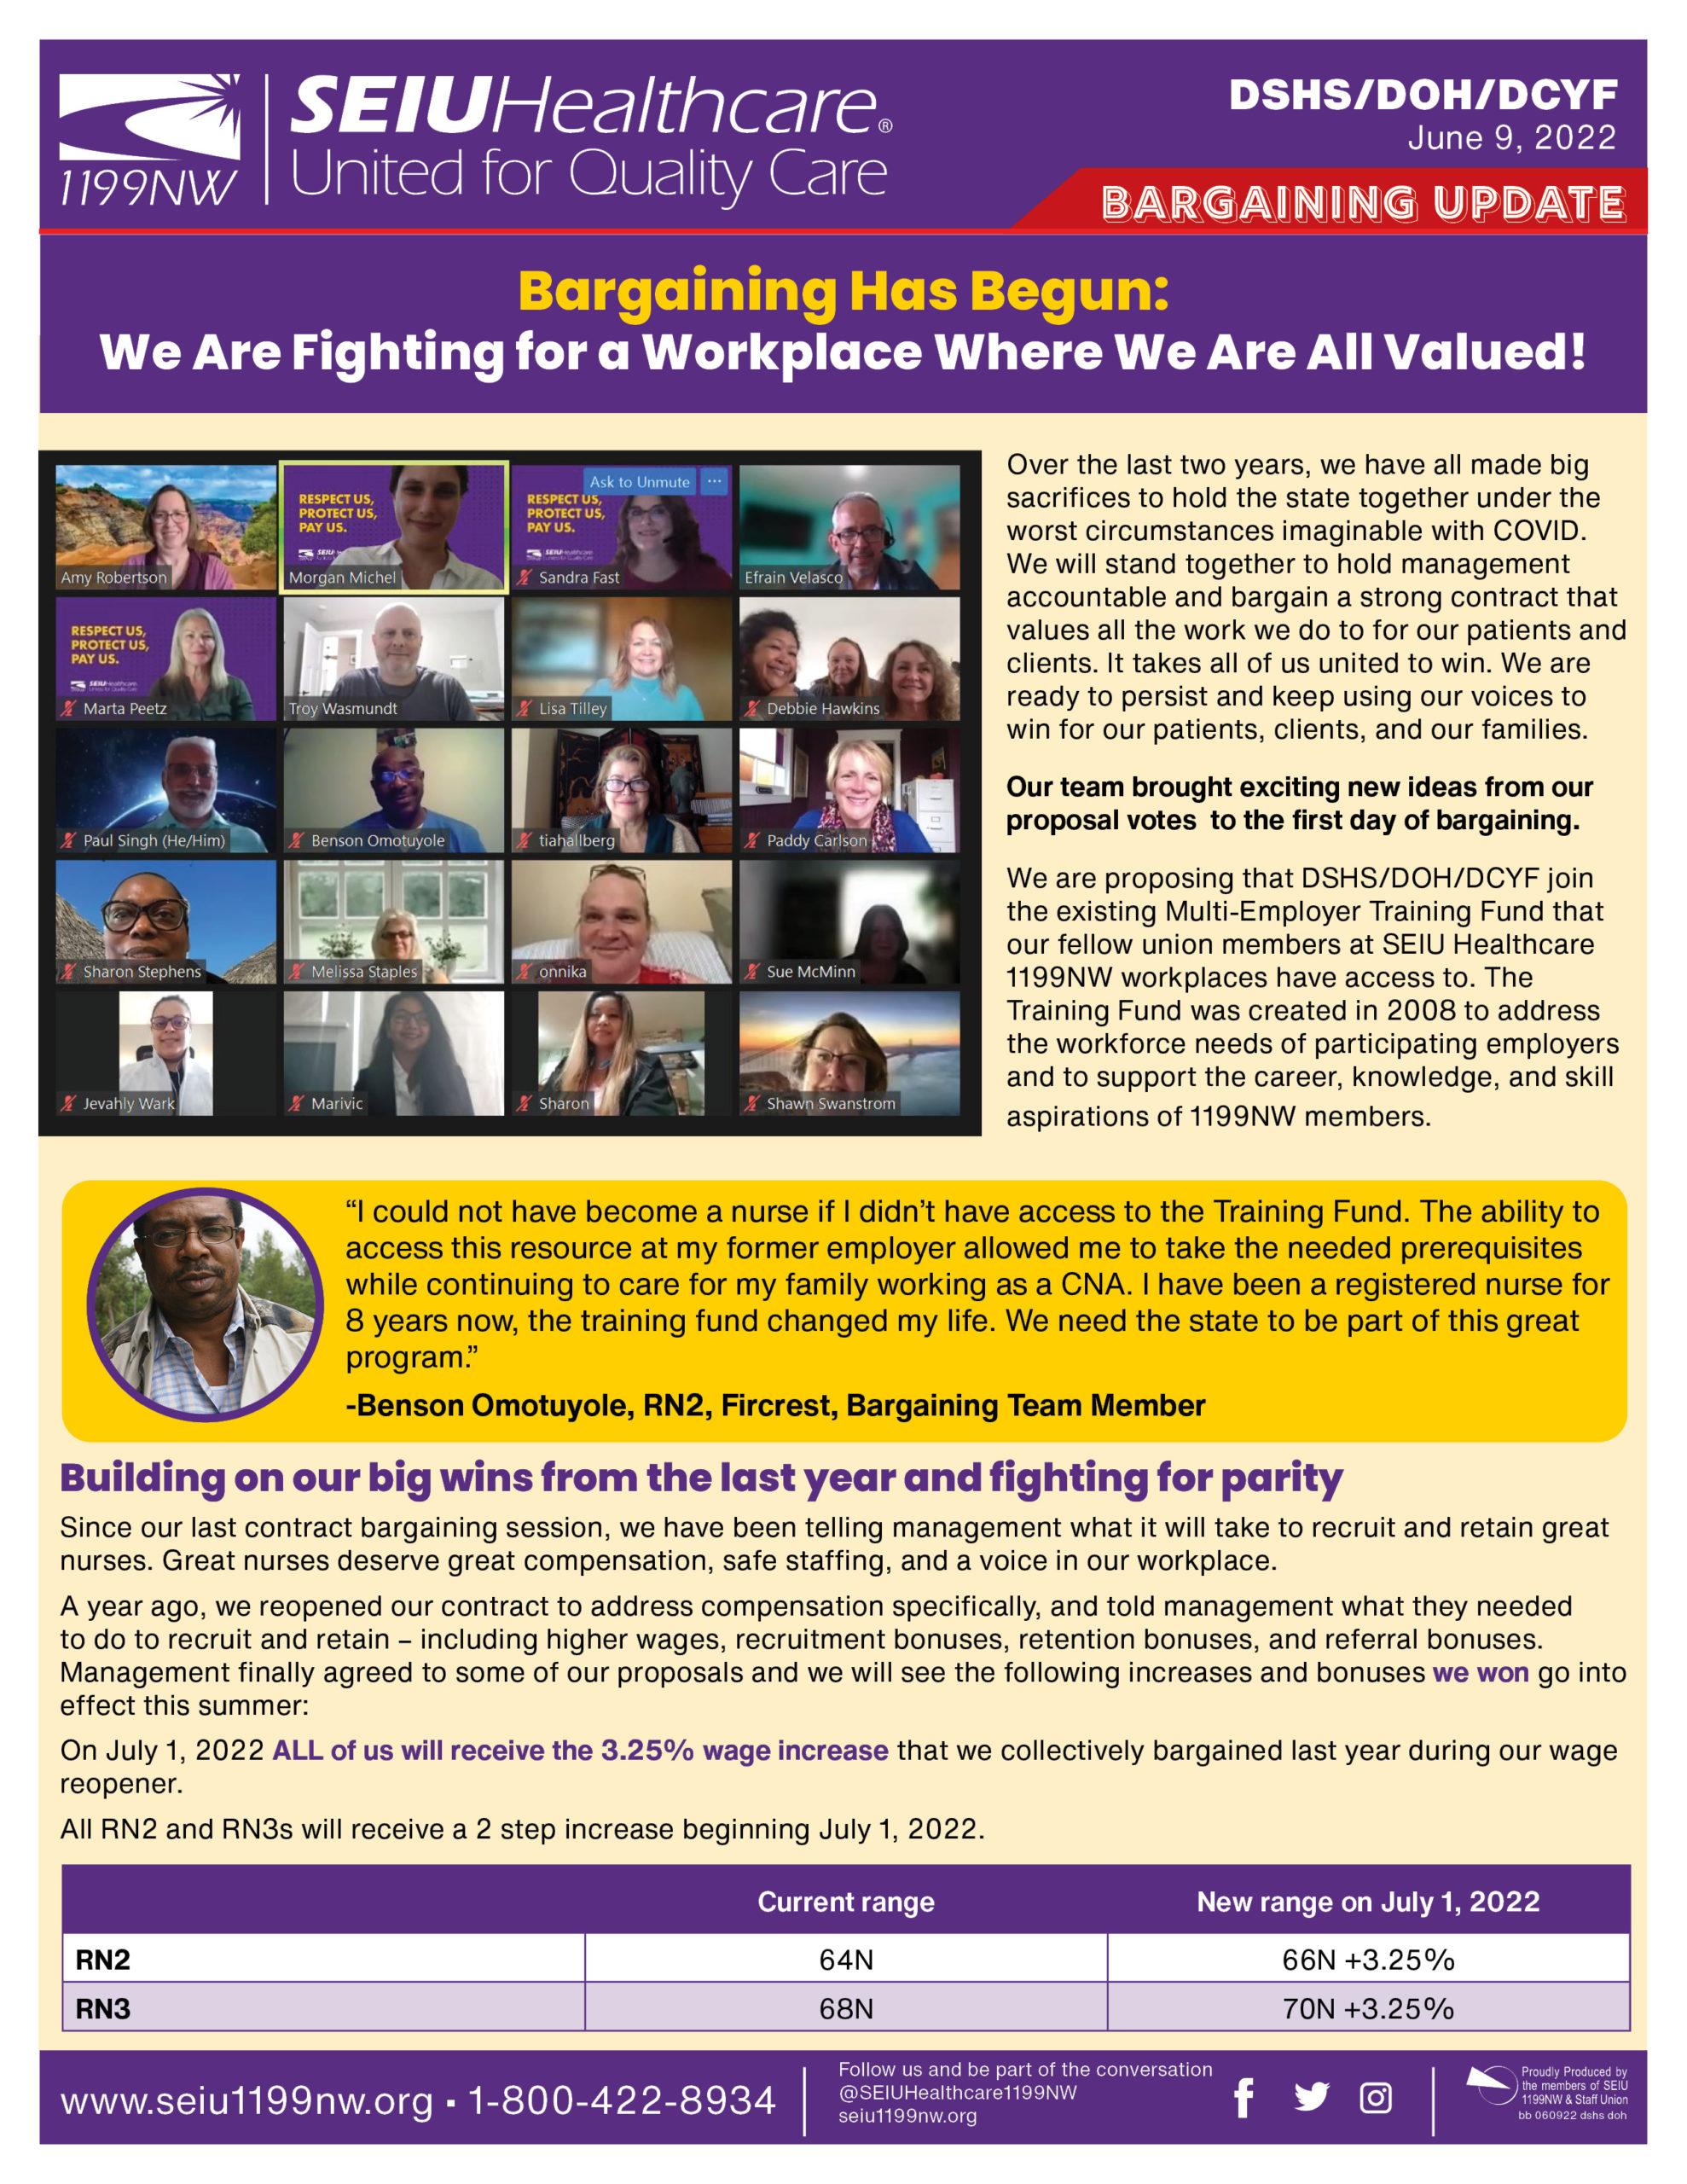 Bargaining Has Begun: We Are Fighting for a Workplace Where We Are All Valued!